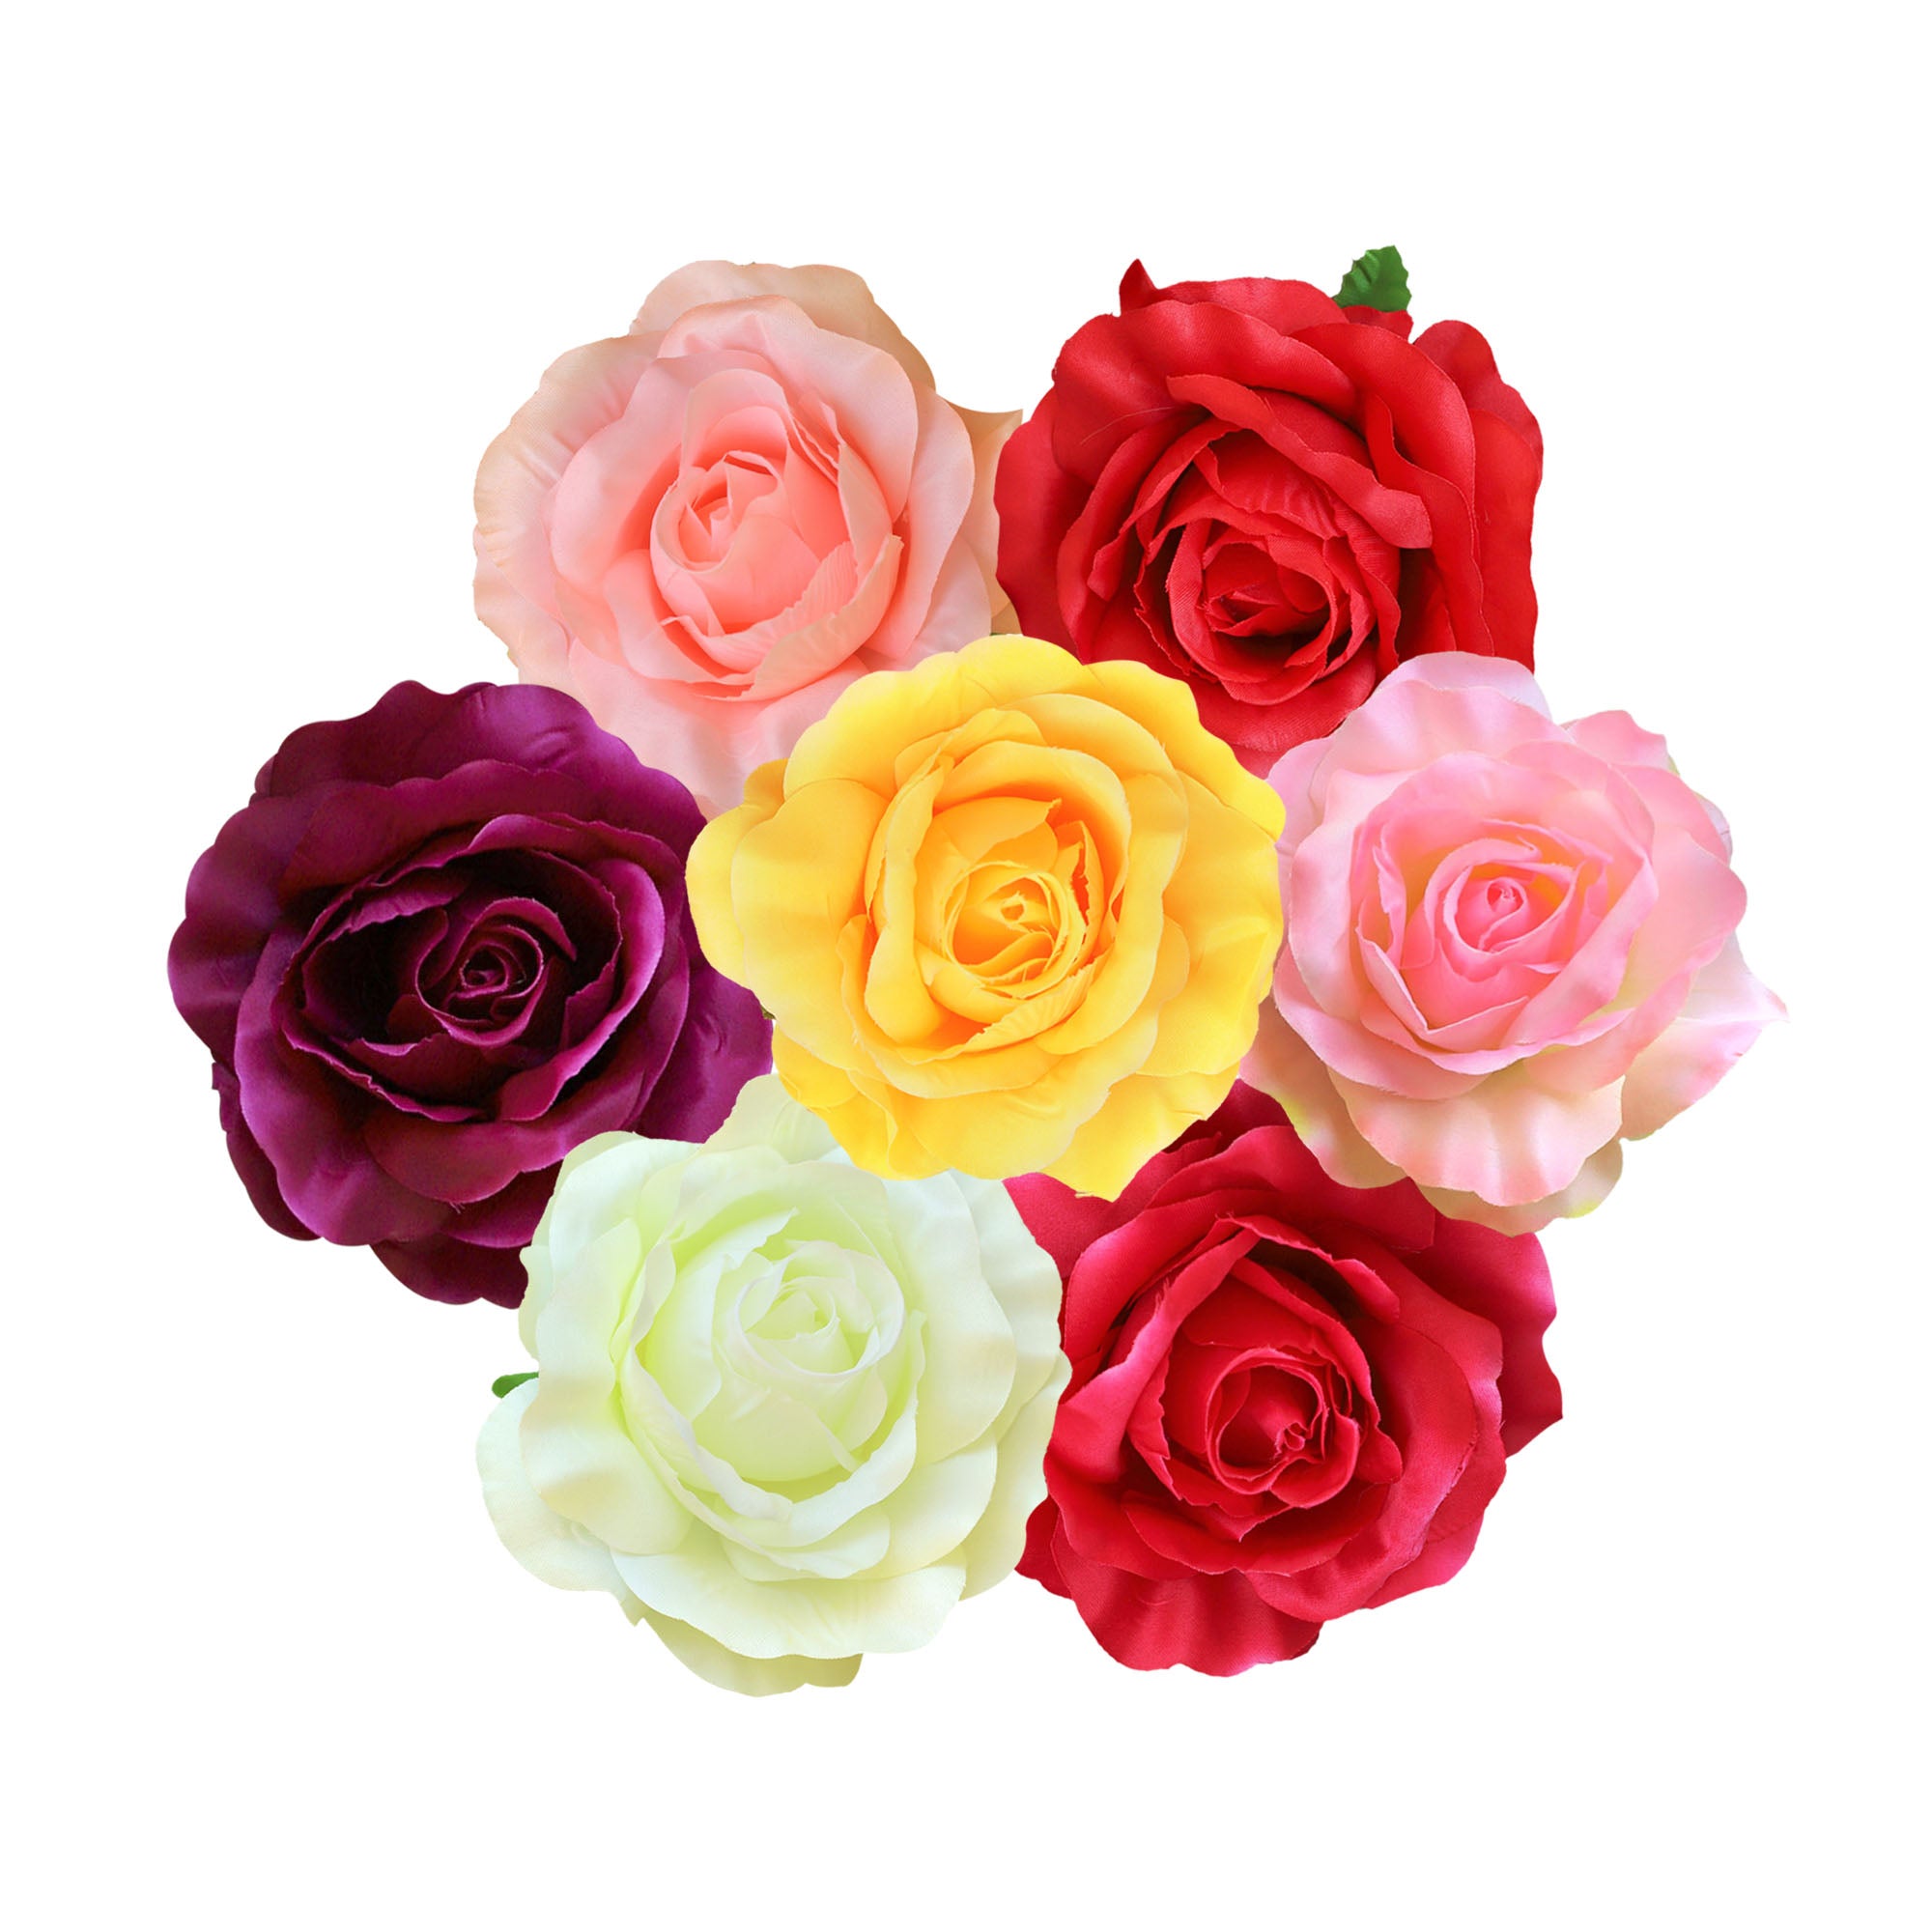 Extra Large Fake Silk Rose Heads 5 inches